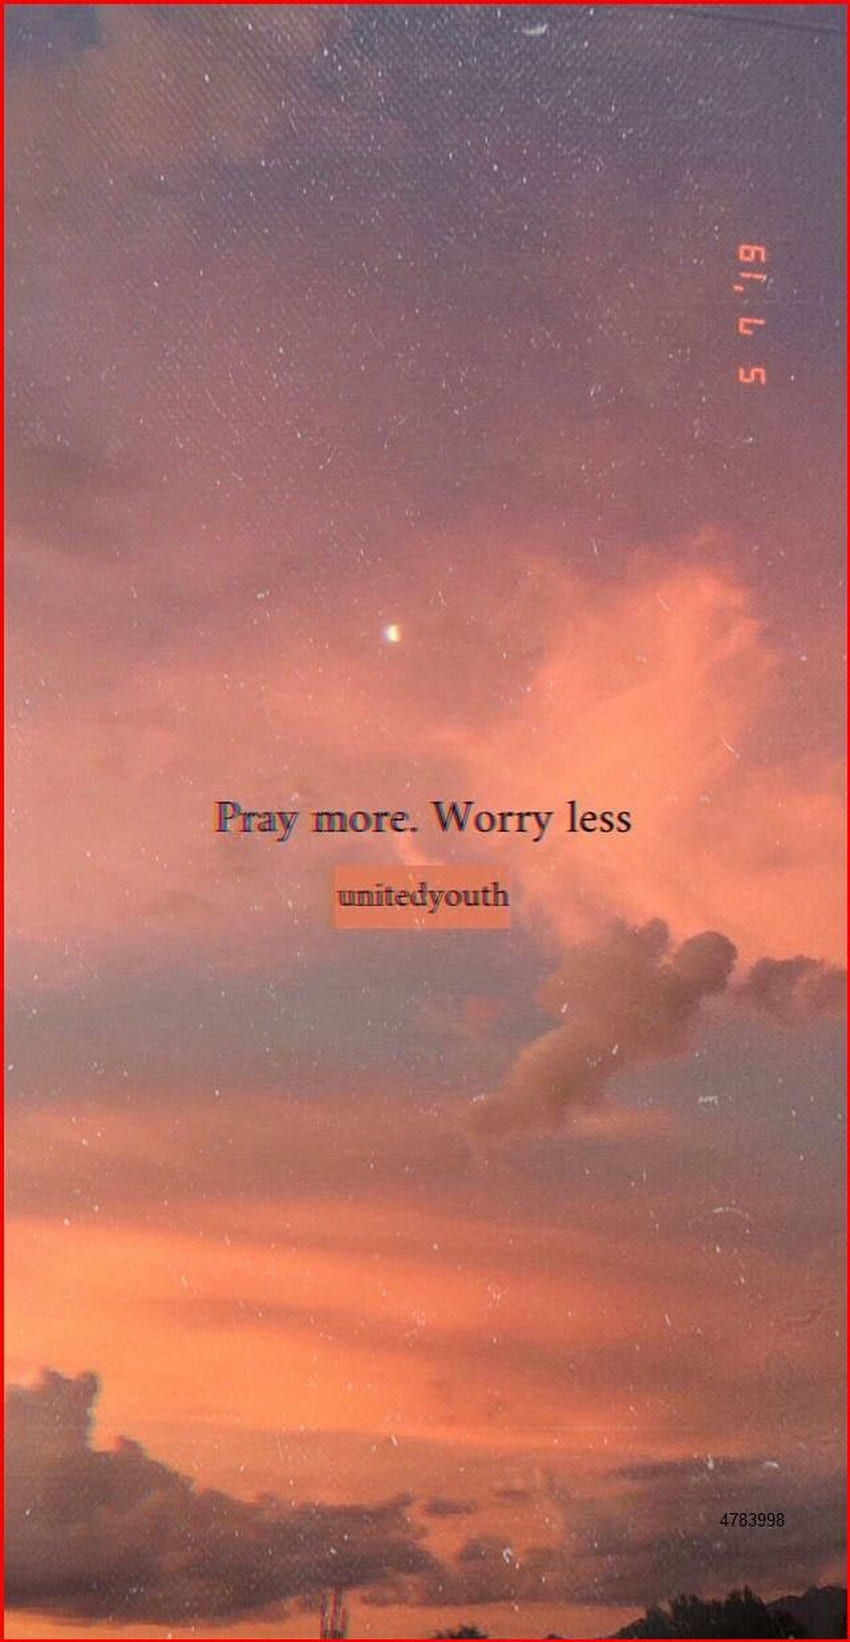 A poster that says pray more worried less - Jesus